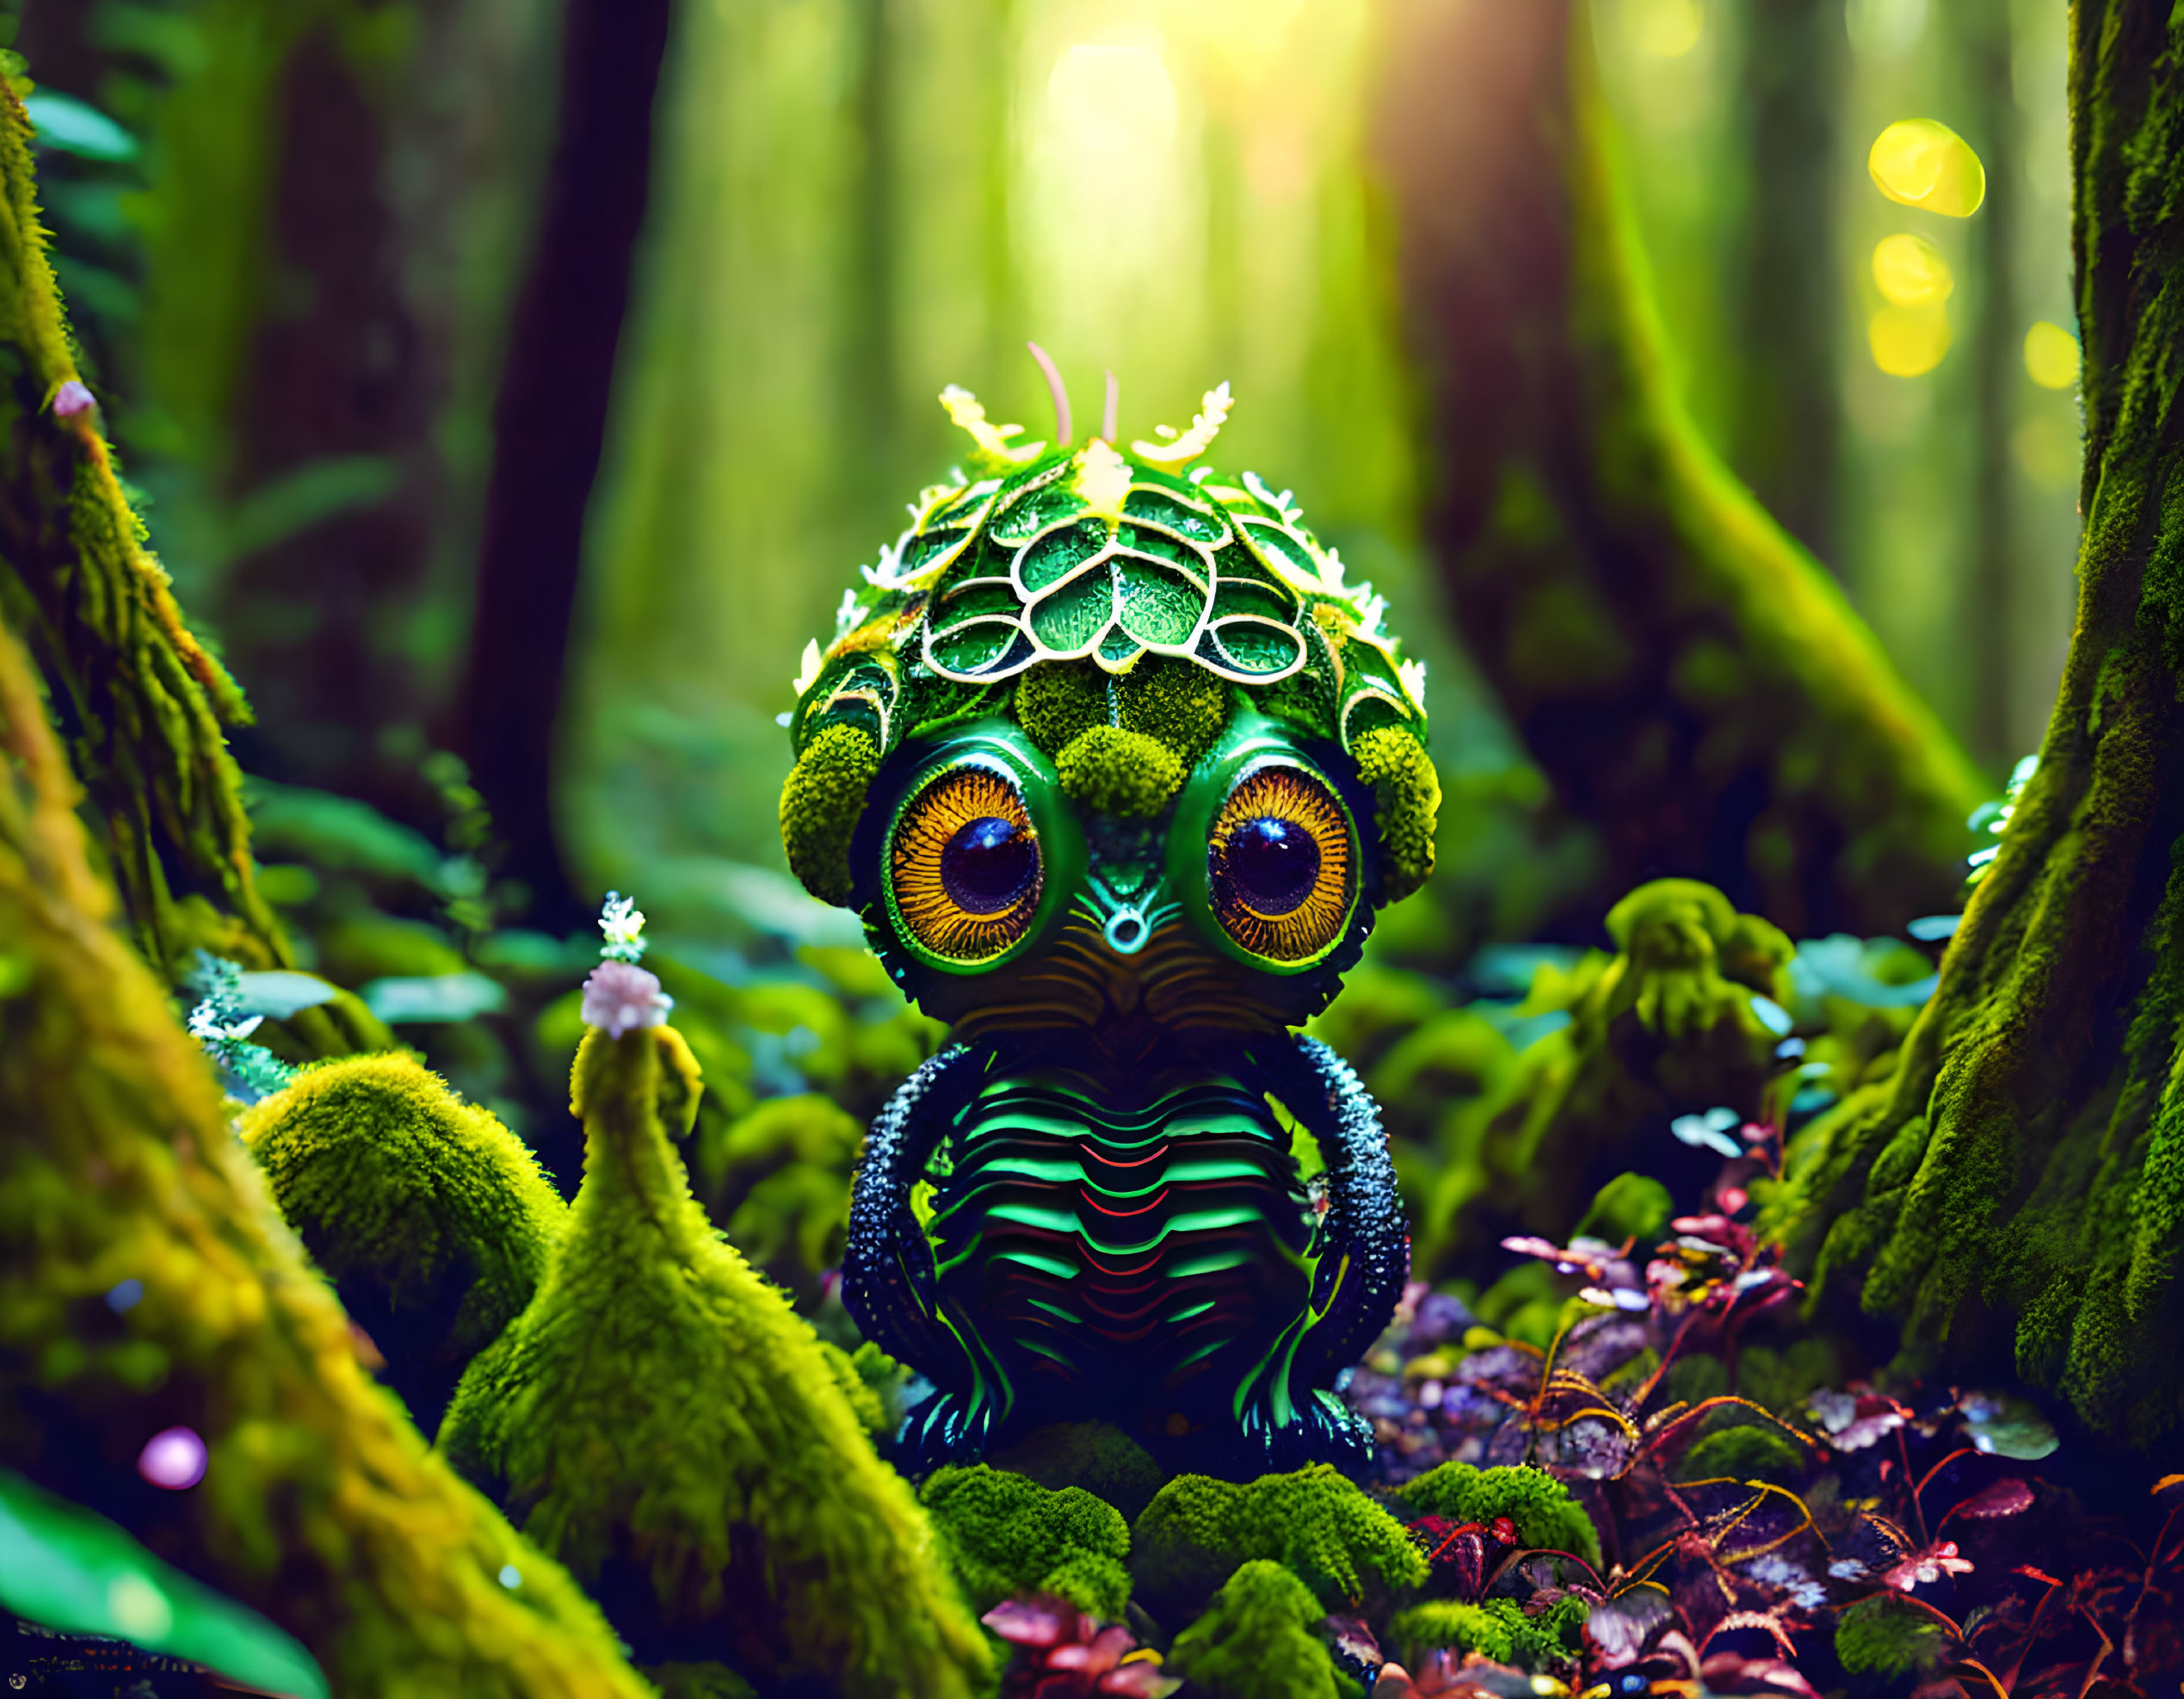 A very cute forest alien